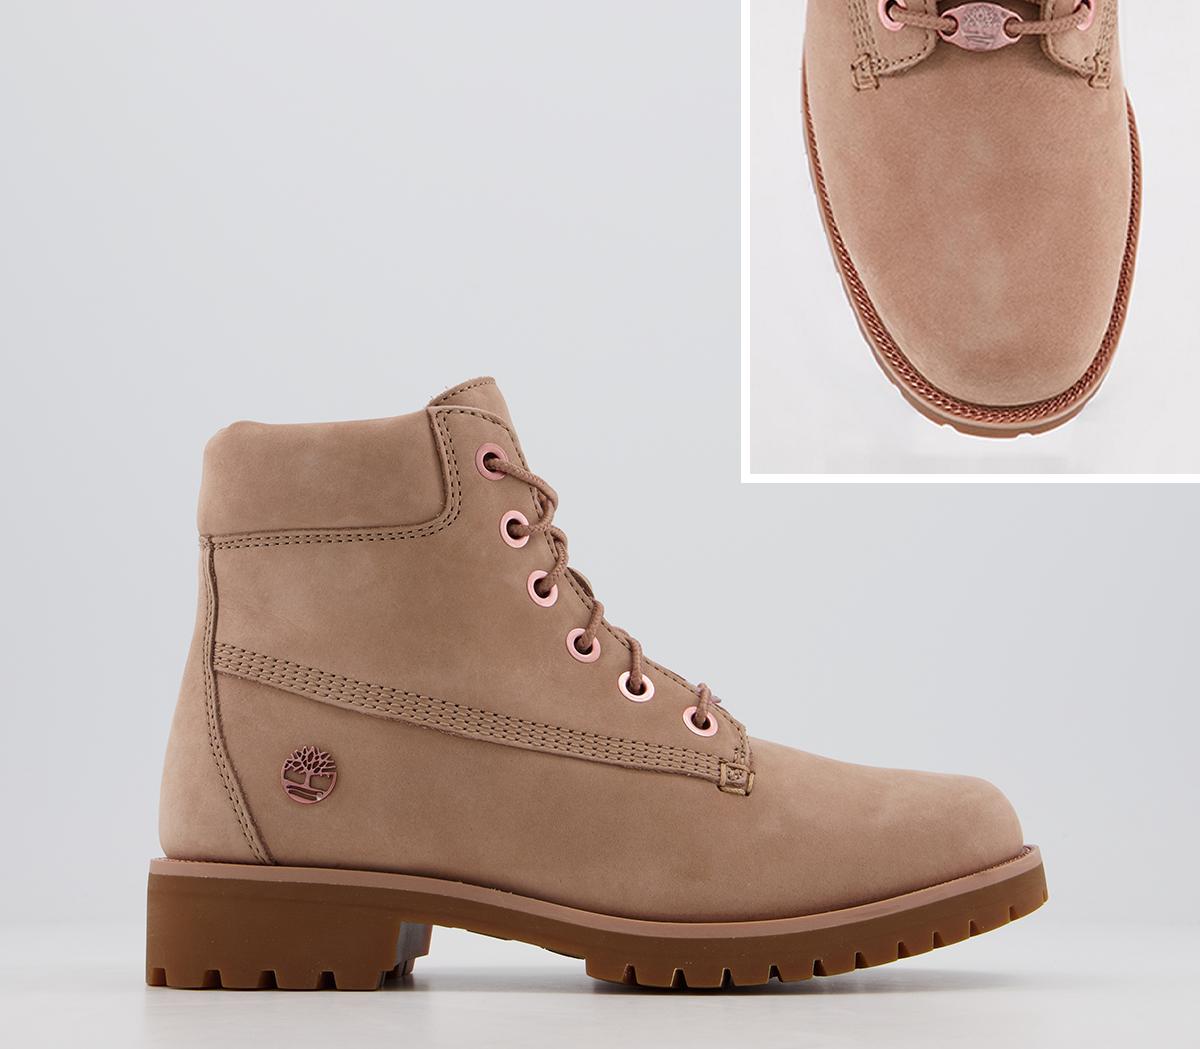 6 Inch Boots Tawny Rose Gold Chain 